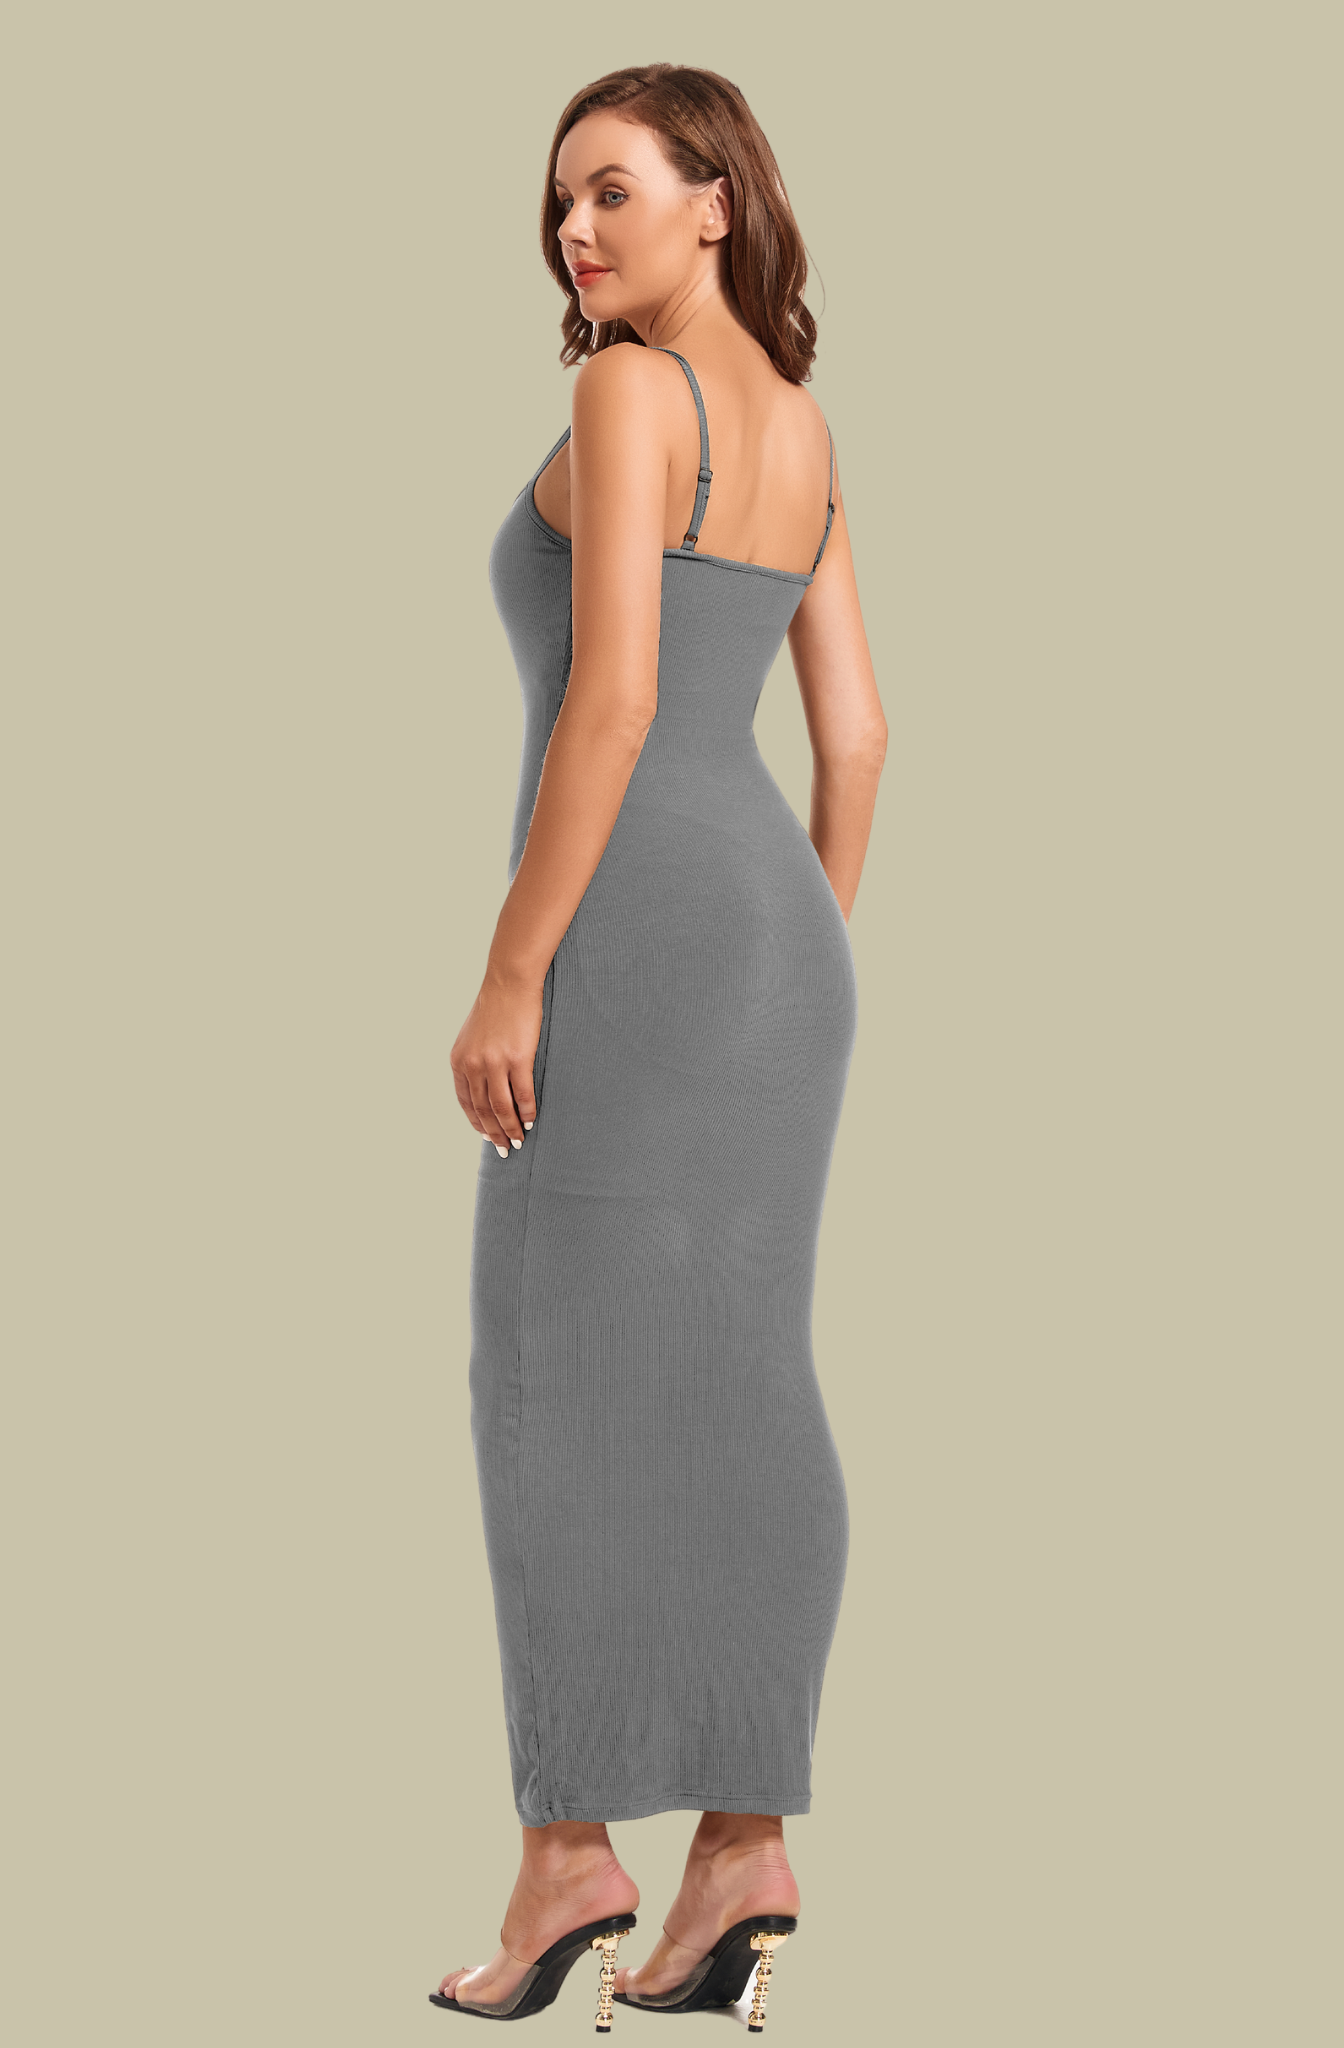 Shaper Dress Maxi With Buil-in Slip – Belle's Design